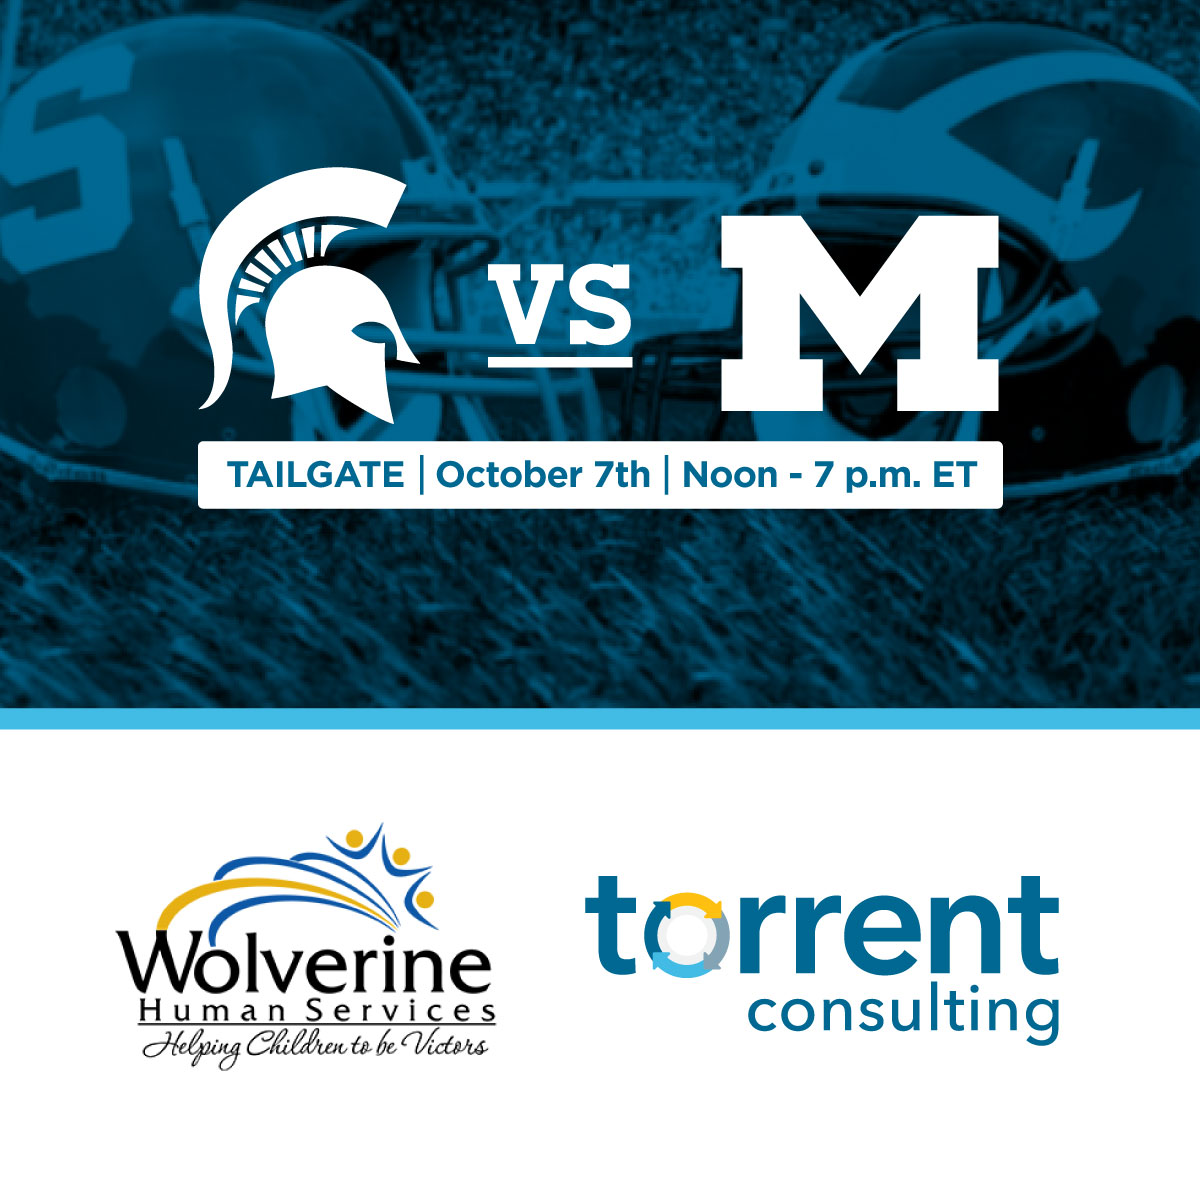 WHS & Torrent’s Tailgate 4 a Cause